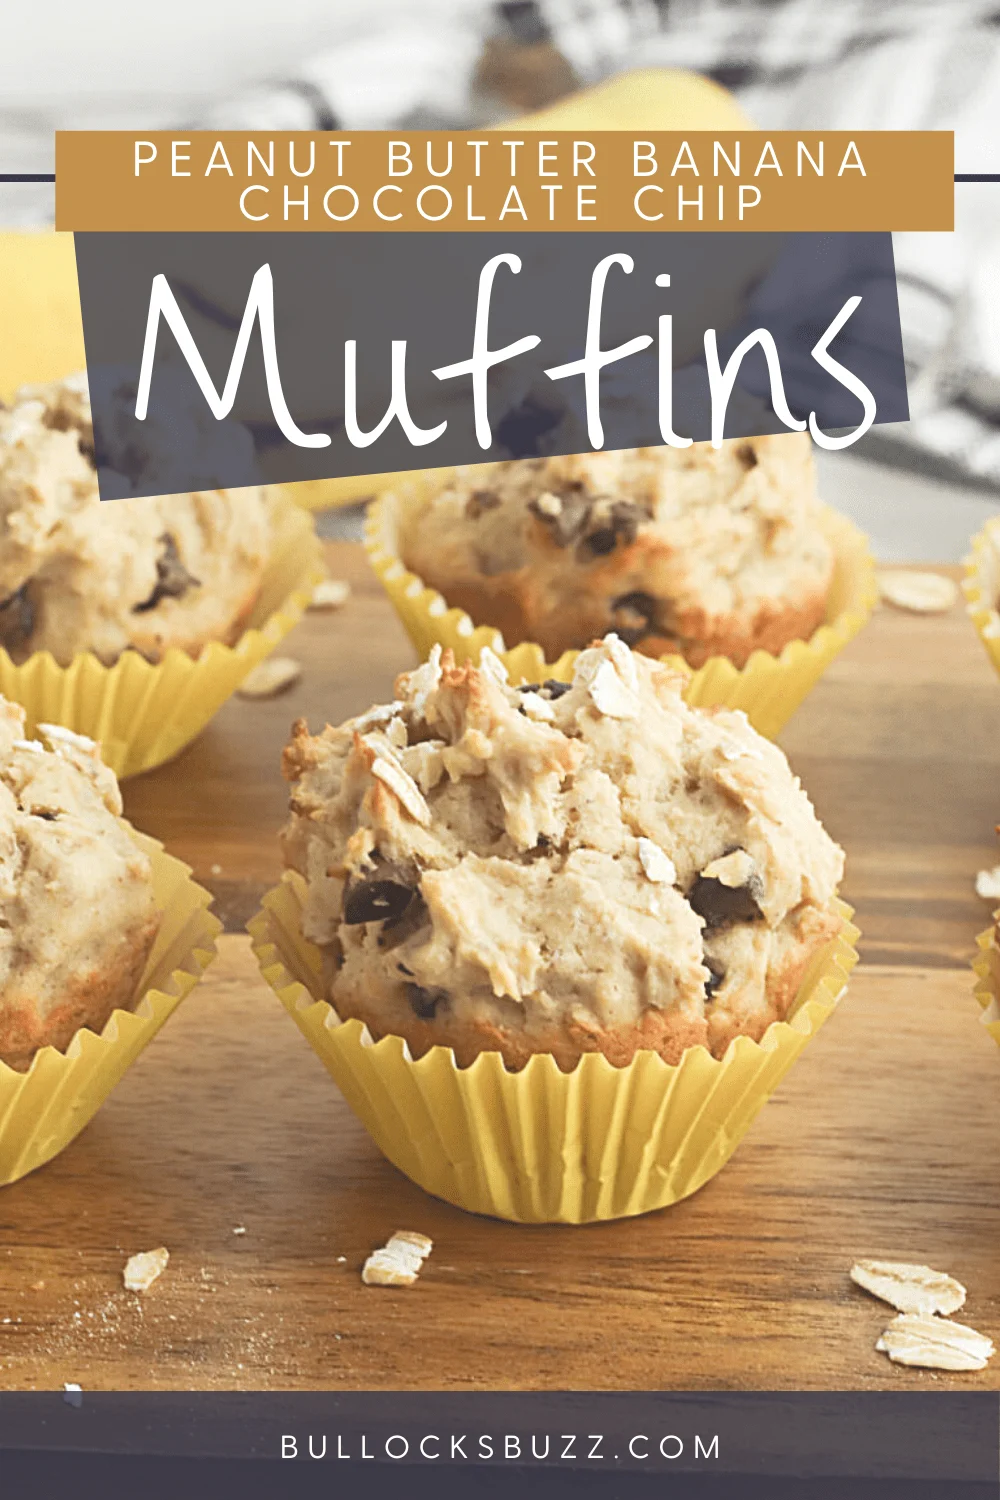 Peanut Butter Banana Chocolate Chip Muffins are soft, moist, and packed full of flavor.  Studded with semi-sweet chocolate chips, these next-level muffins offer the perfect amount of banana, peanut butter, and chocolate flavor in every bite.